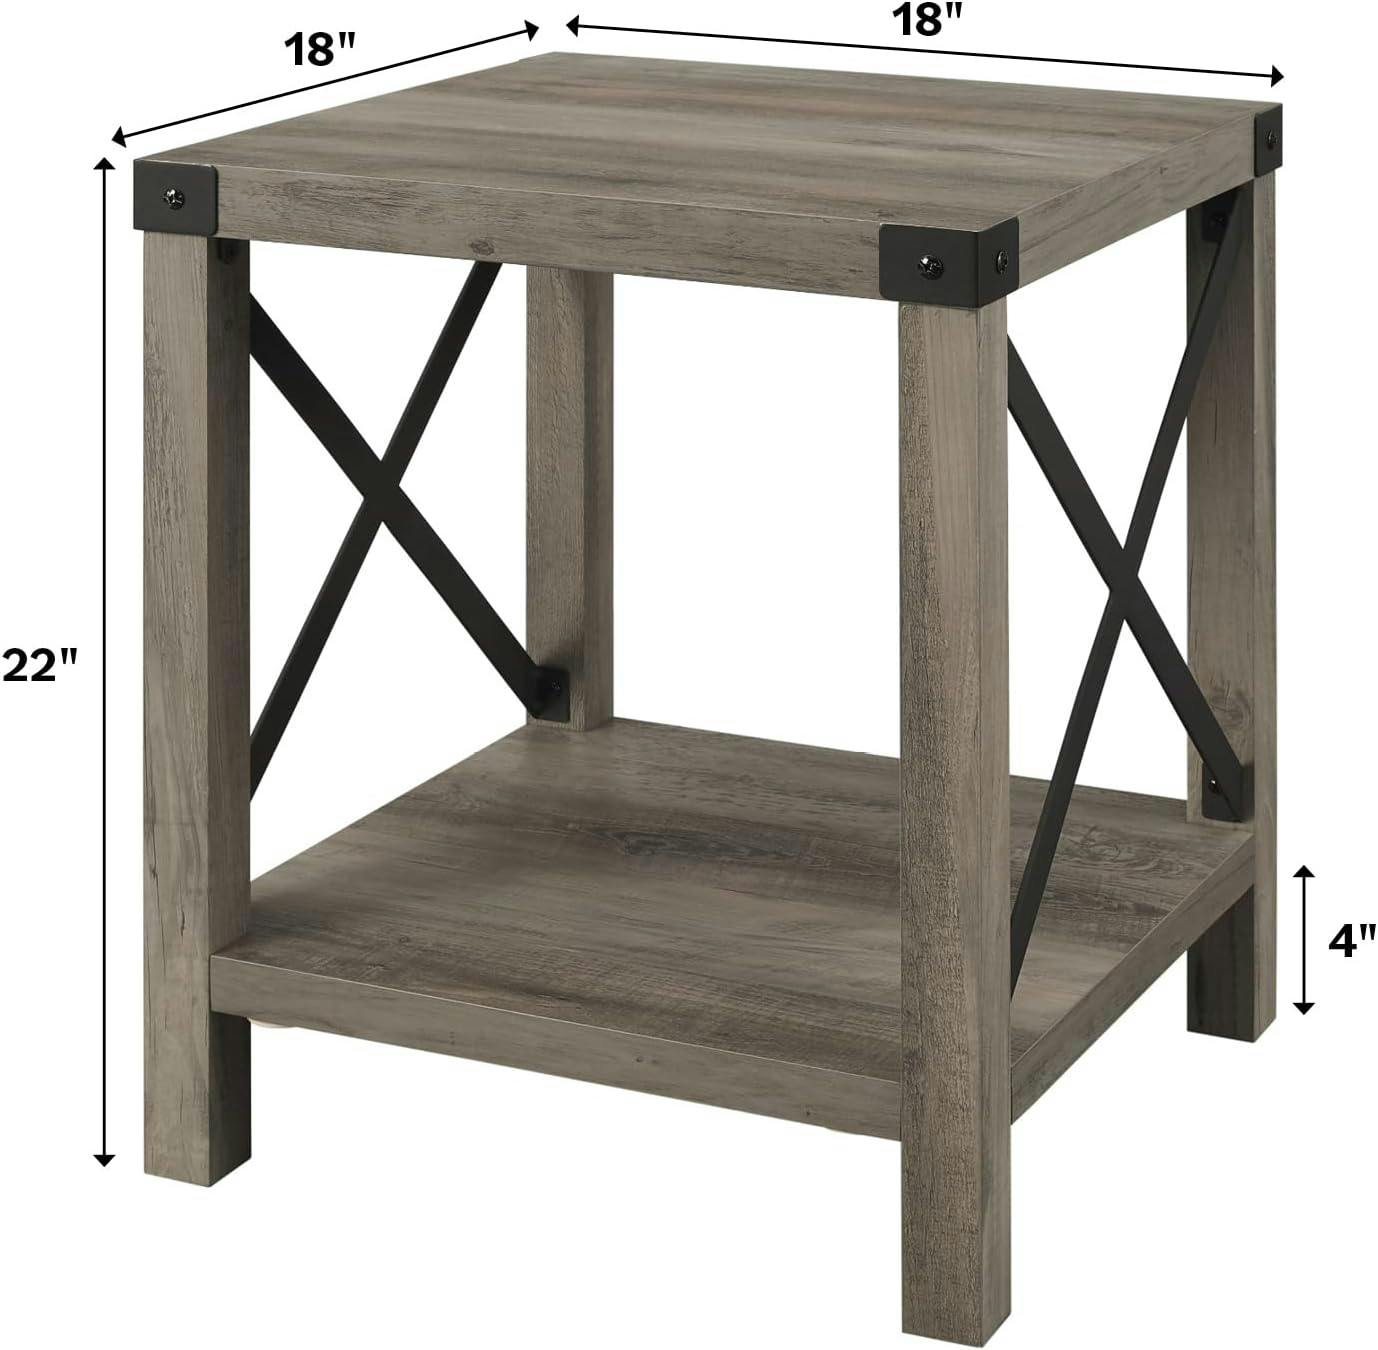 Rustic Farmhouse 18" Square Wood & Metal X-Accent Side Table in Dark Walnut